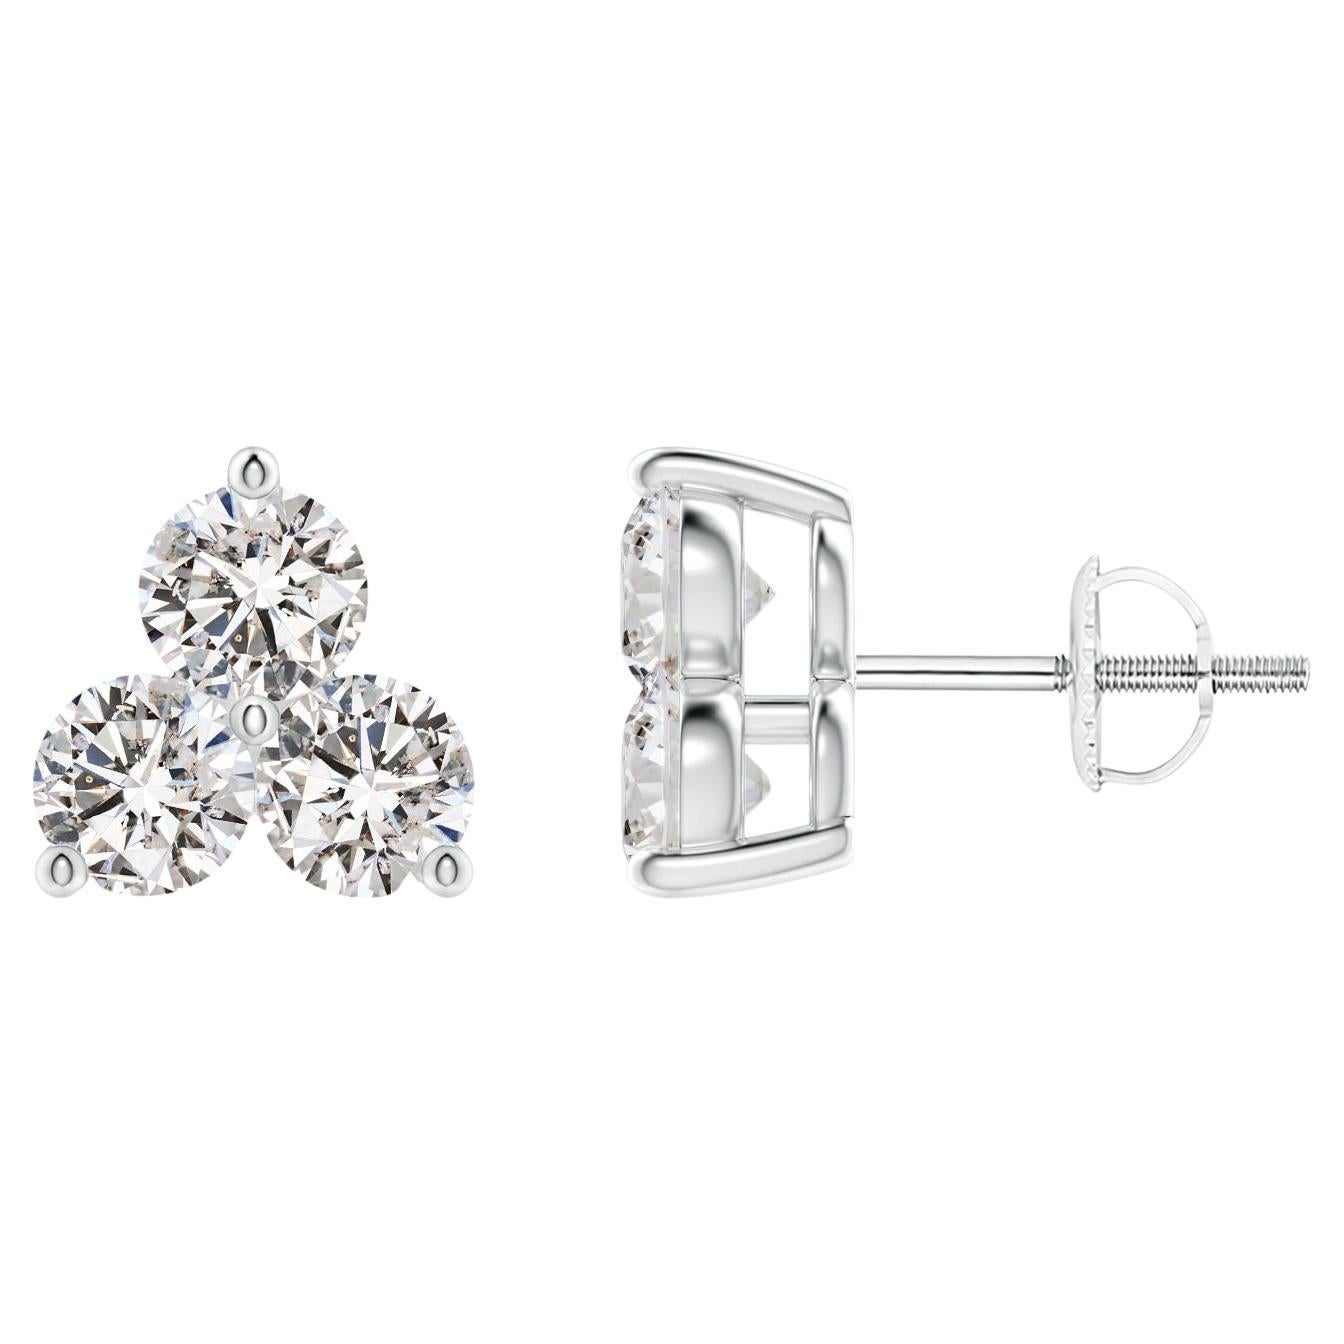 Natural Diamond Stud Earrings in Platinum (1cttw  Color-I-J  Clarity-I1-I2)